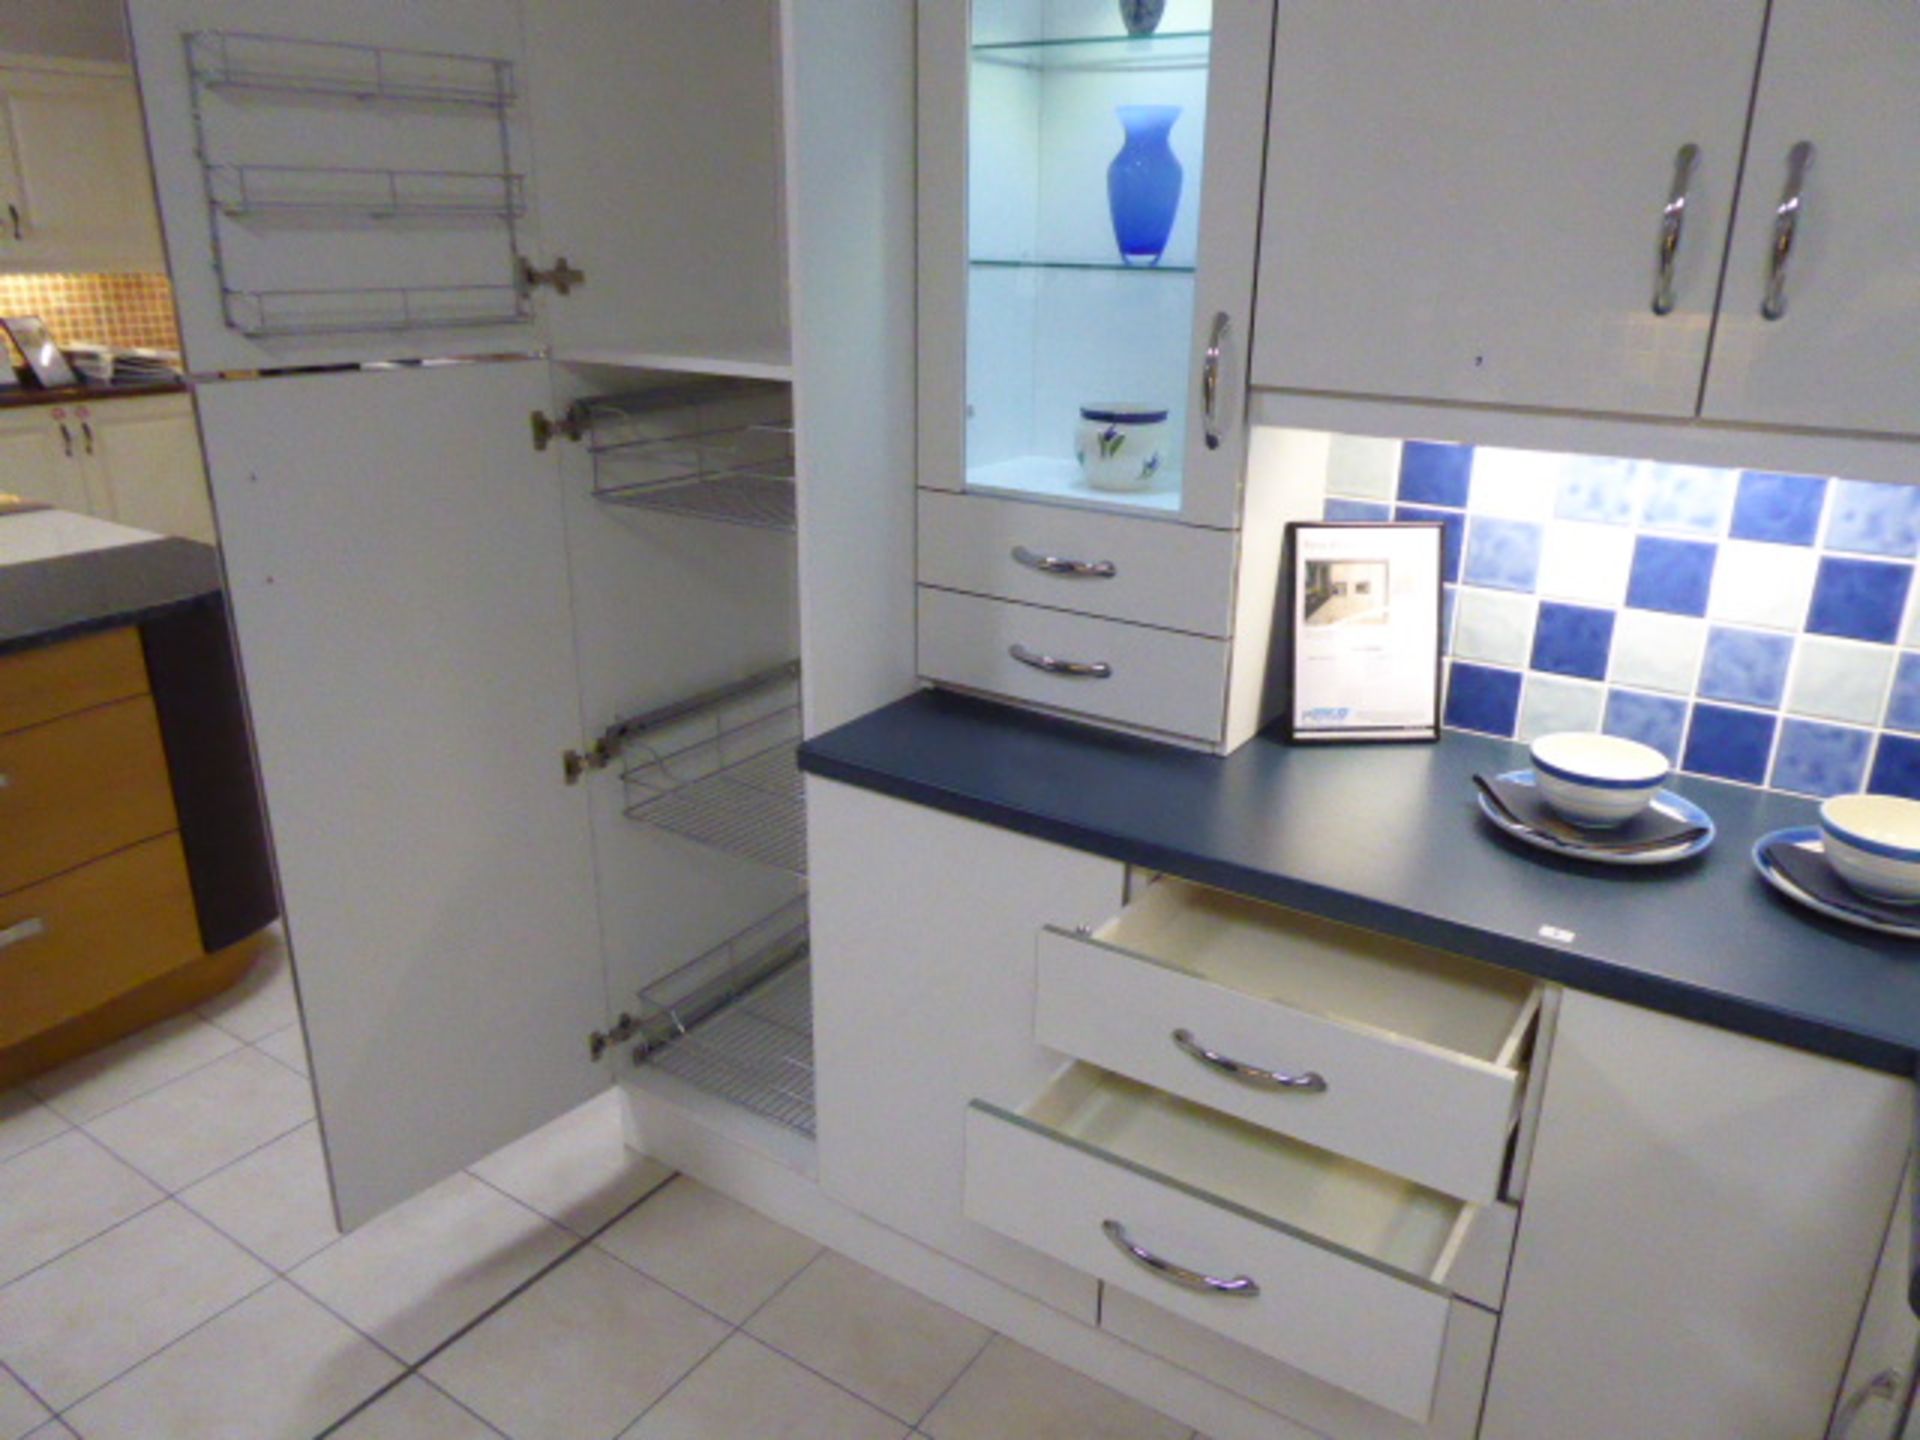 Roma White kitchen in L-shape with a blue granite effect worktop. Max dimensions 240cm by 130cm - Bild 4 aus 4